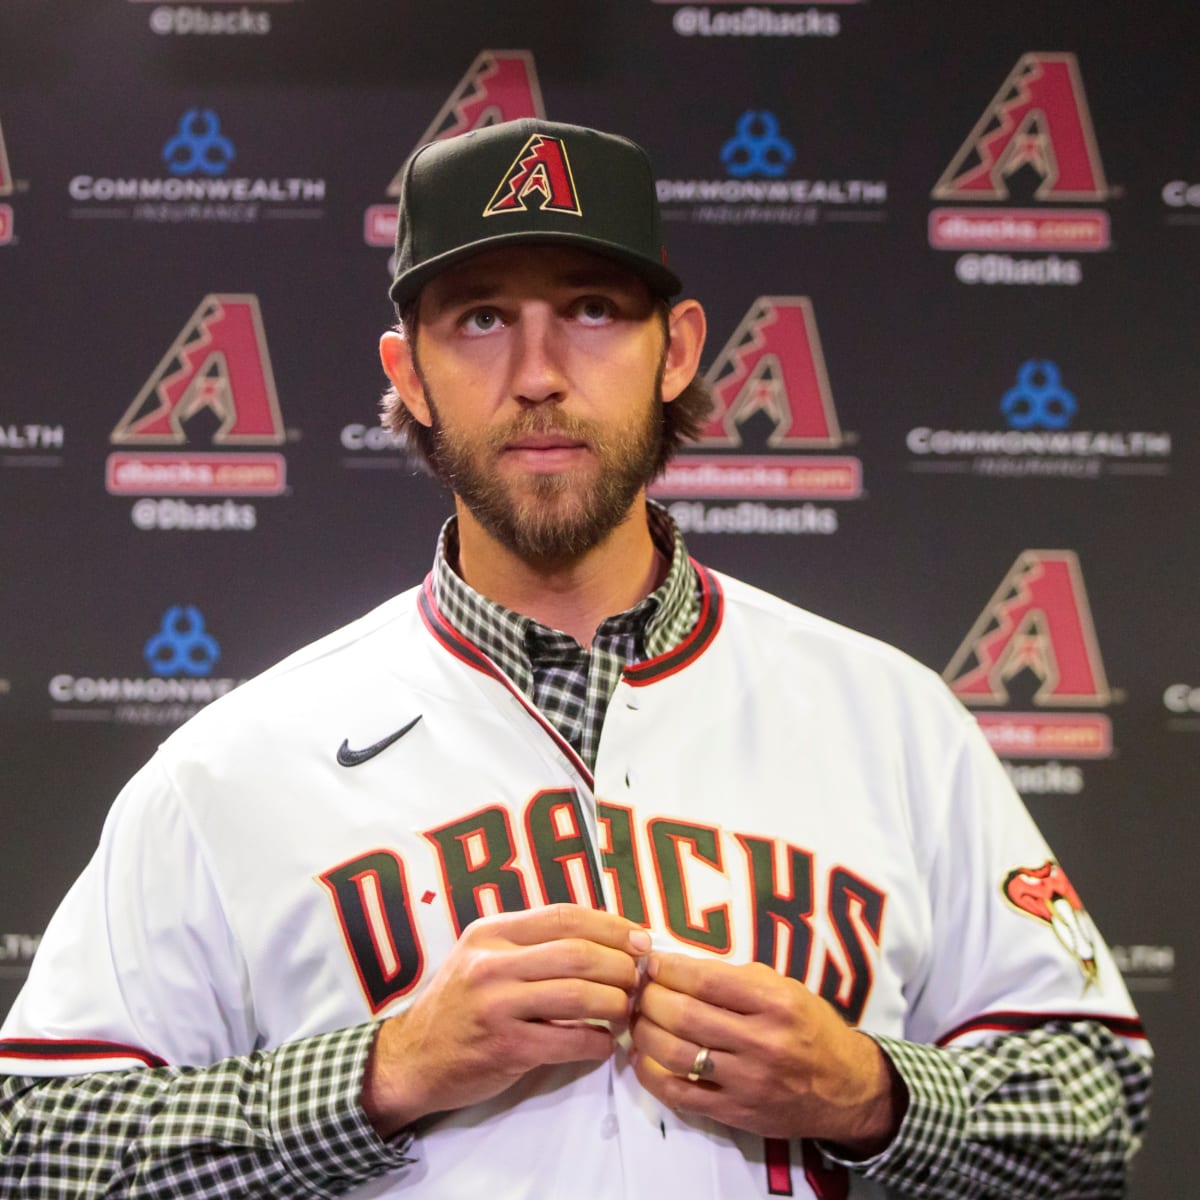 Madison Bumgarner competes in rodeos with alias Mason Saunders